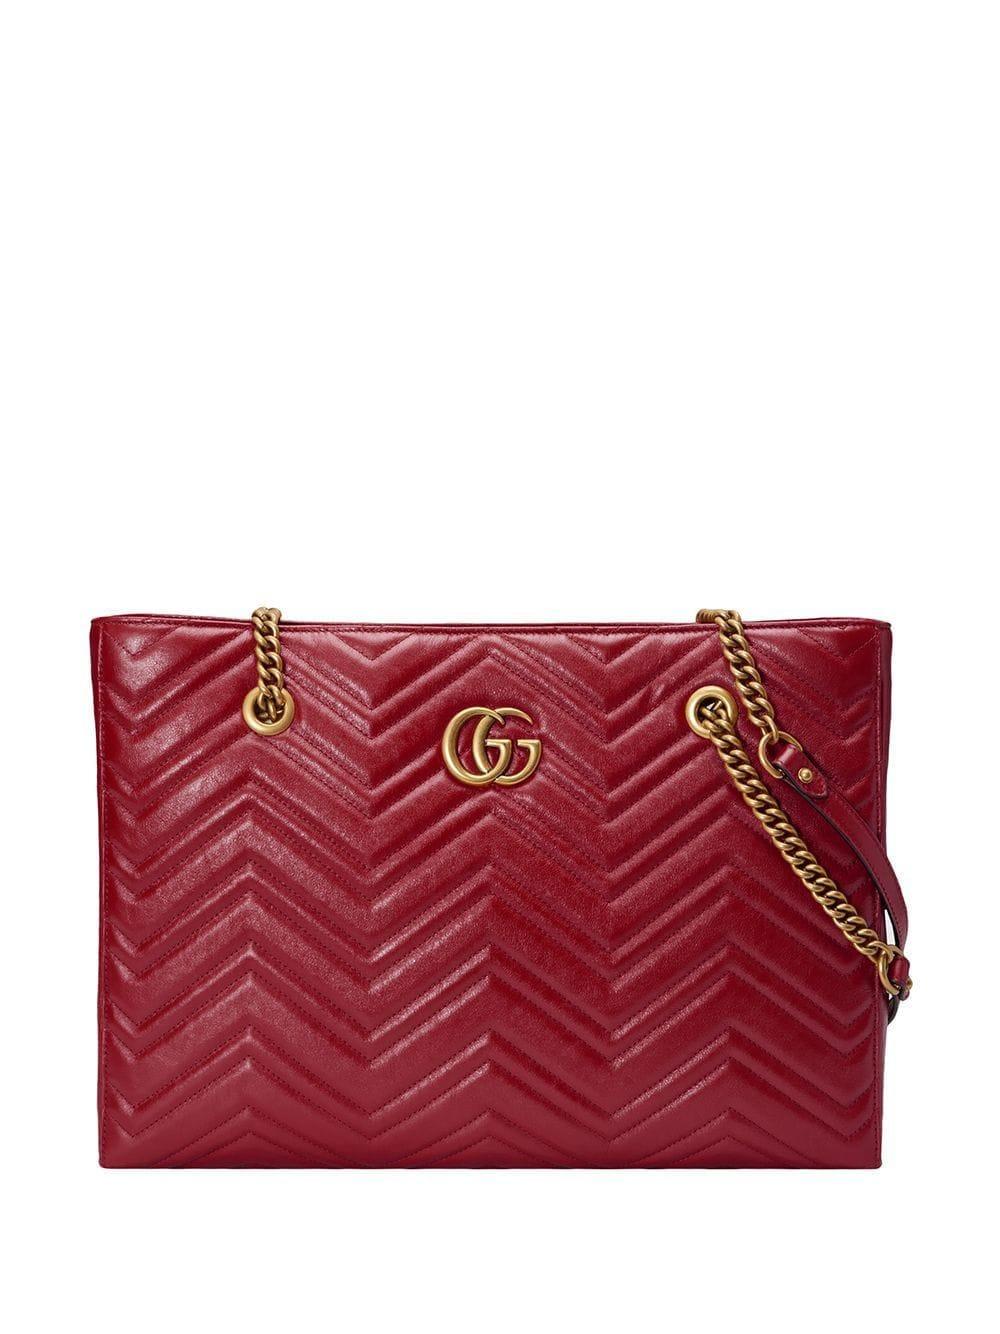 gucci bag marmont red